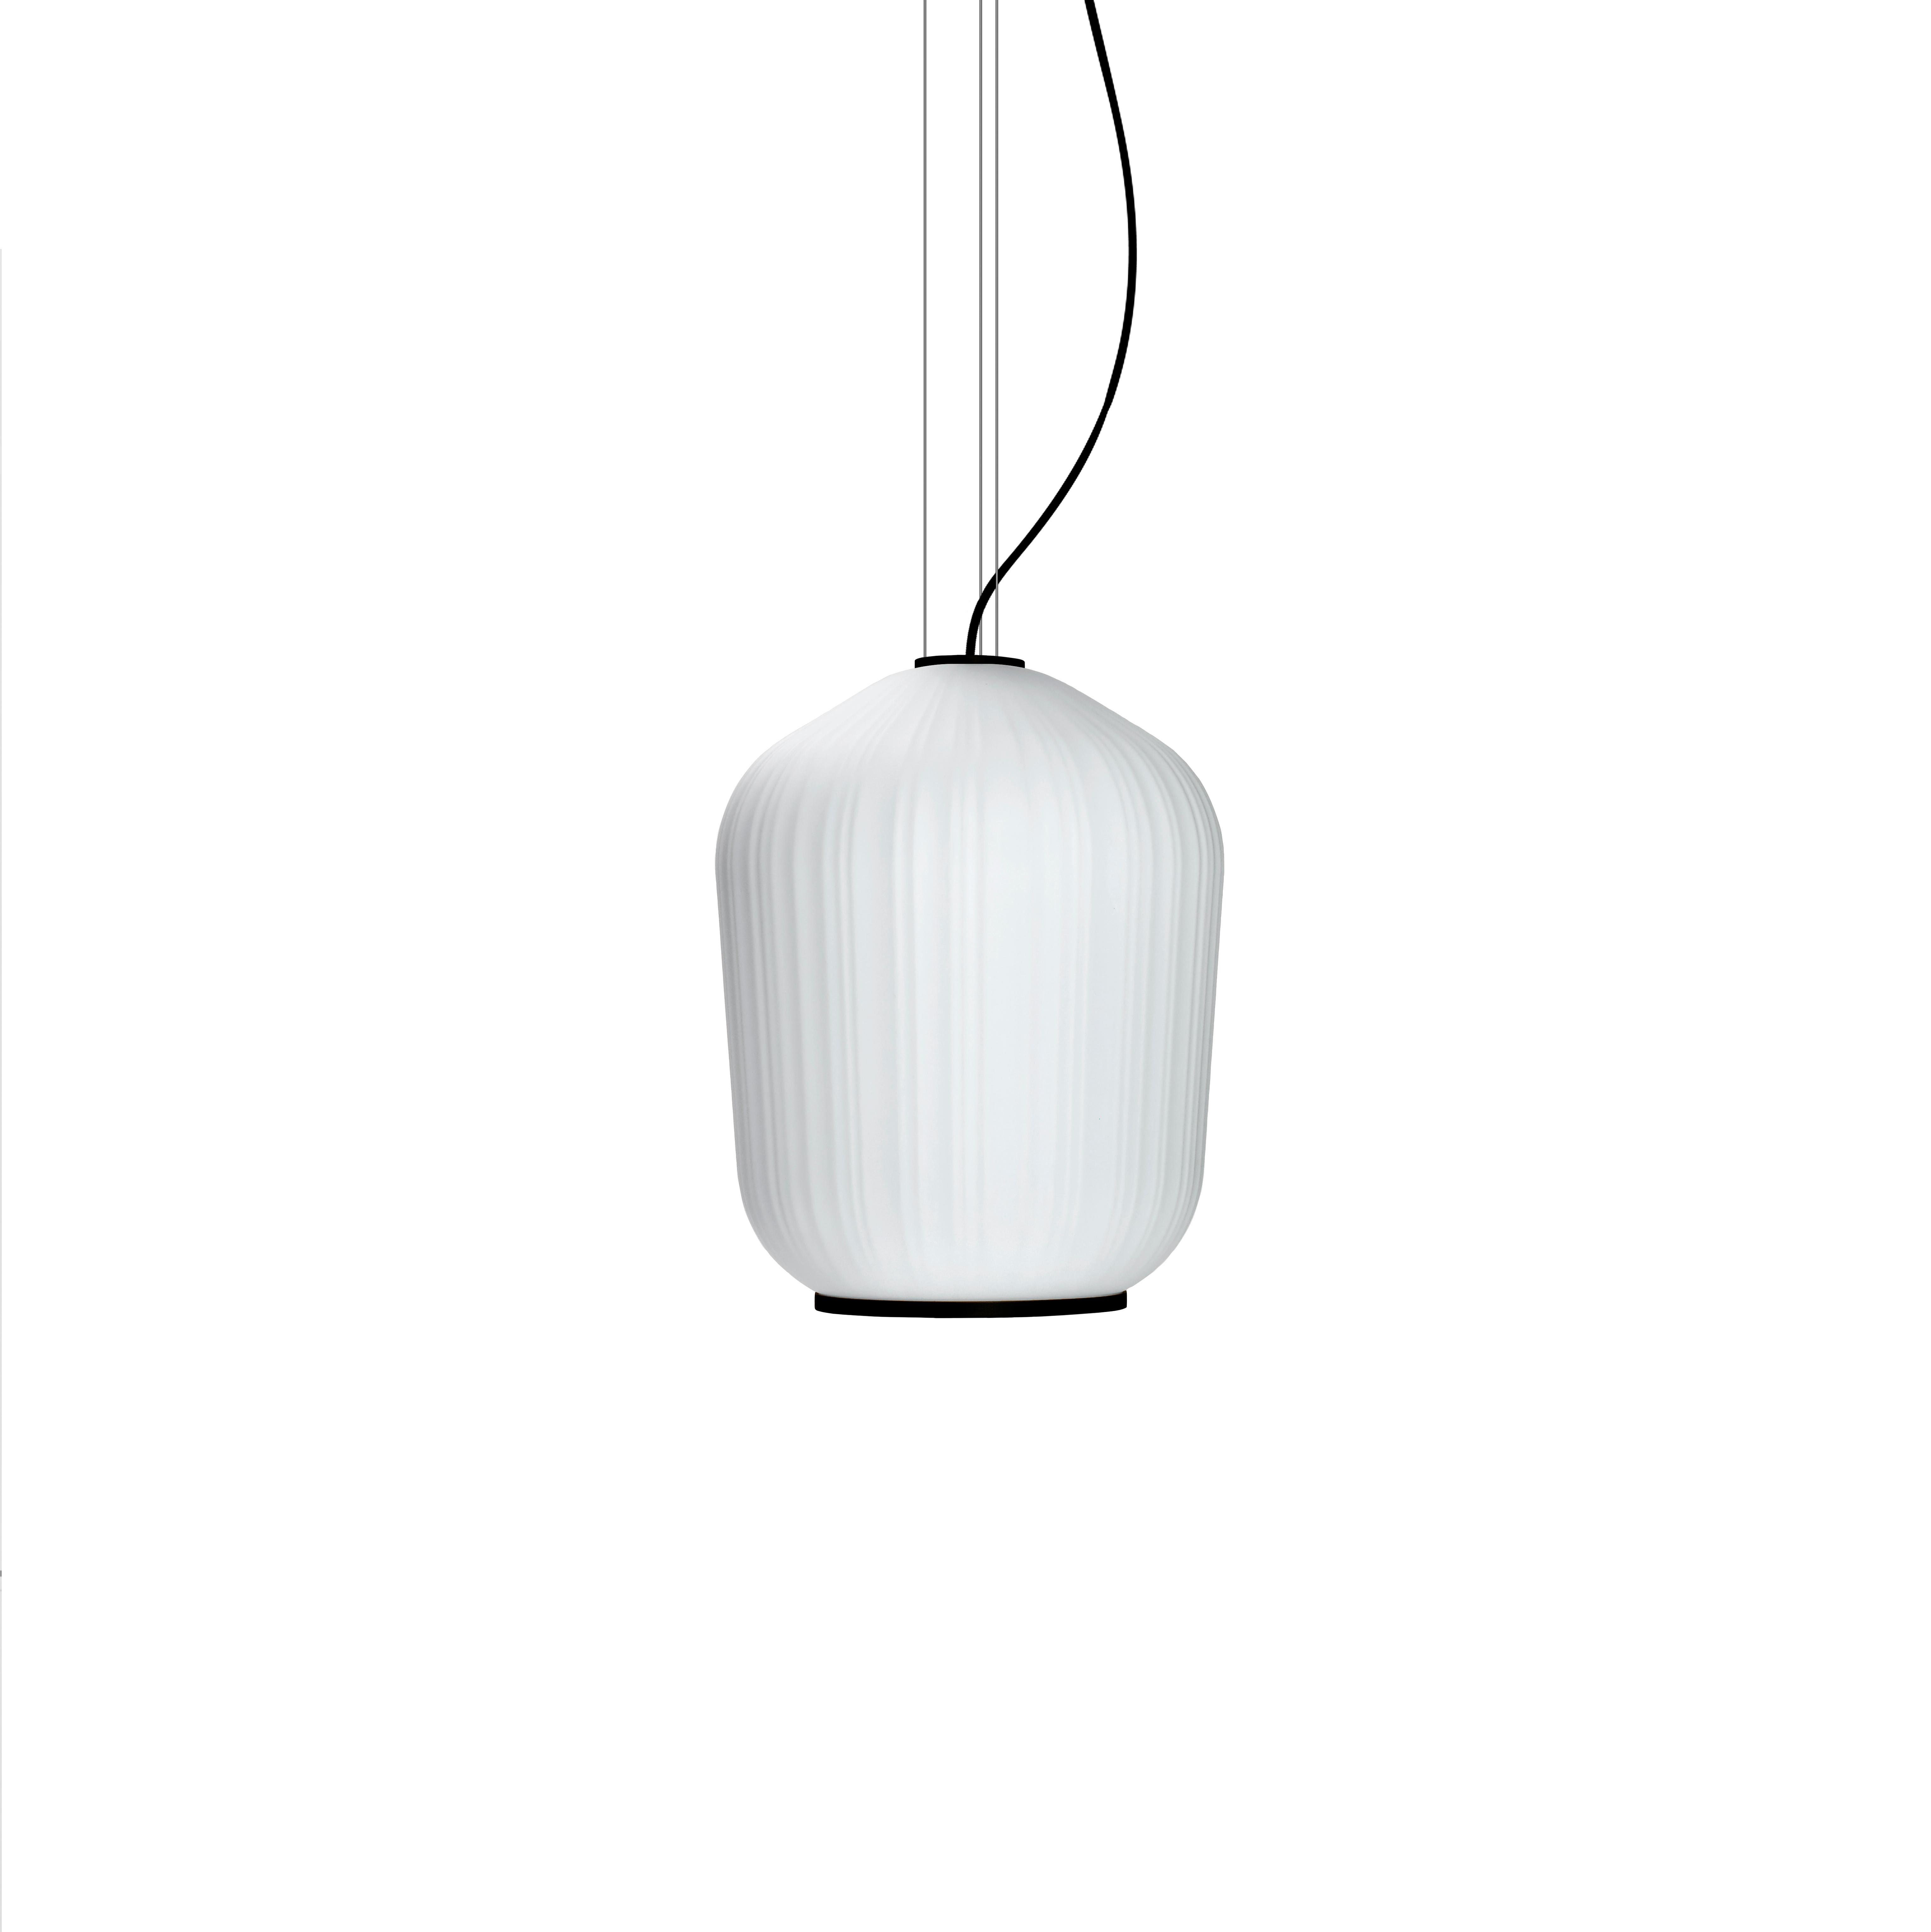 ClassiCon Plissée Pendant Lamp by Sebastian Herkner In New Condition For Sale In New York, NY